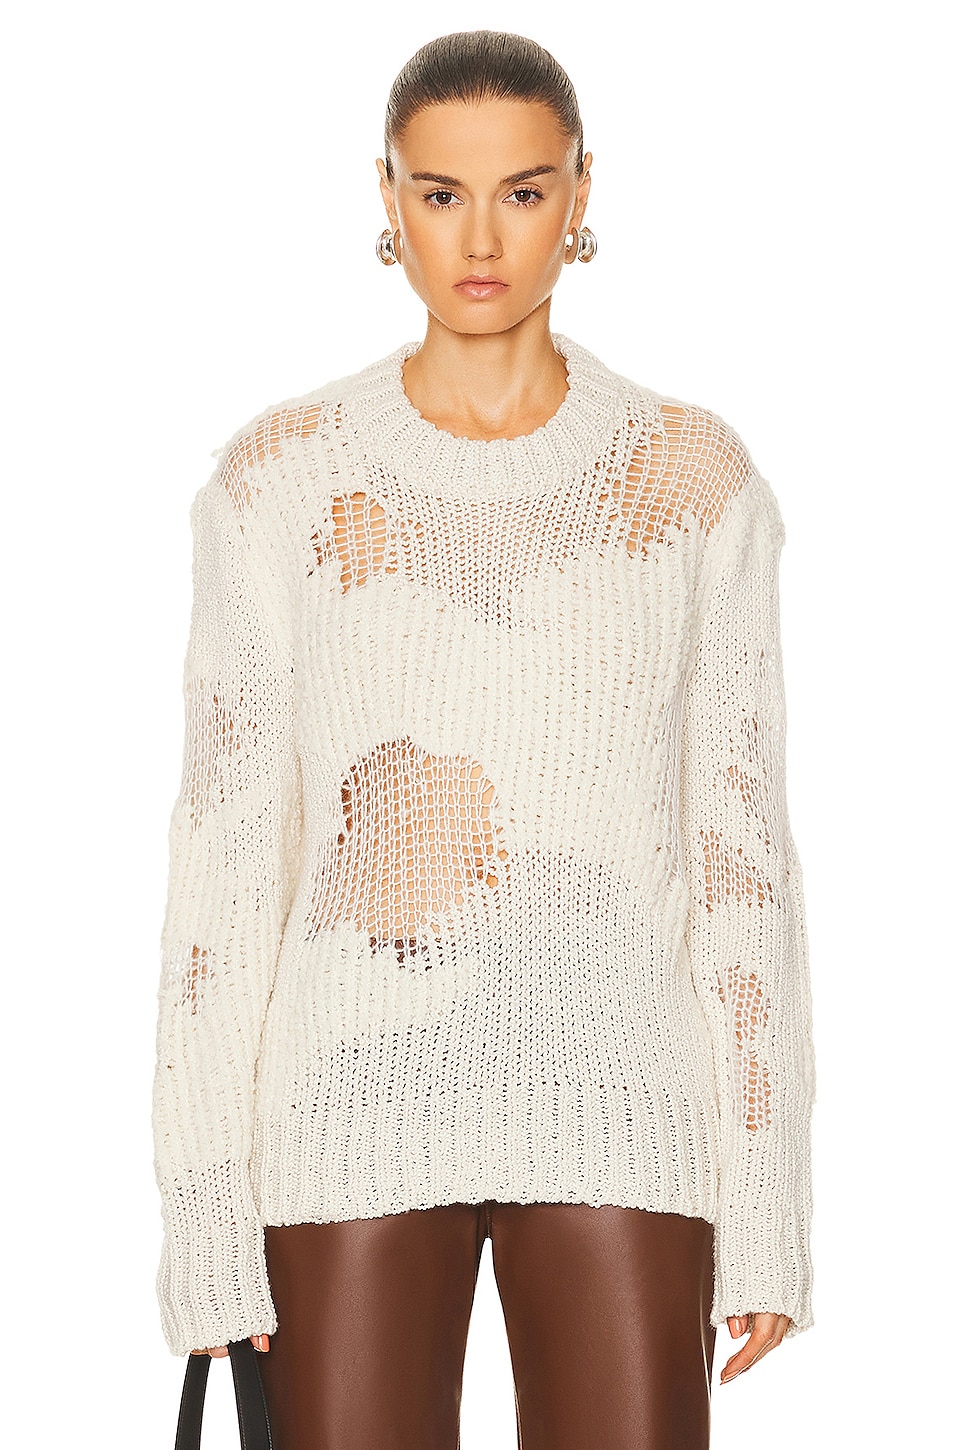 Distressed Sweater in Ivory